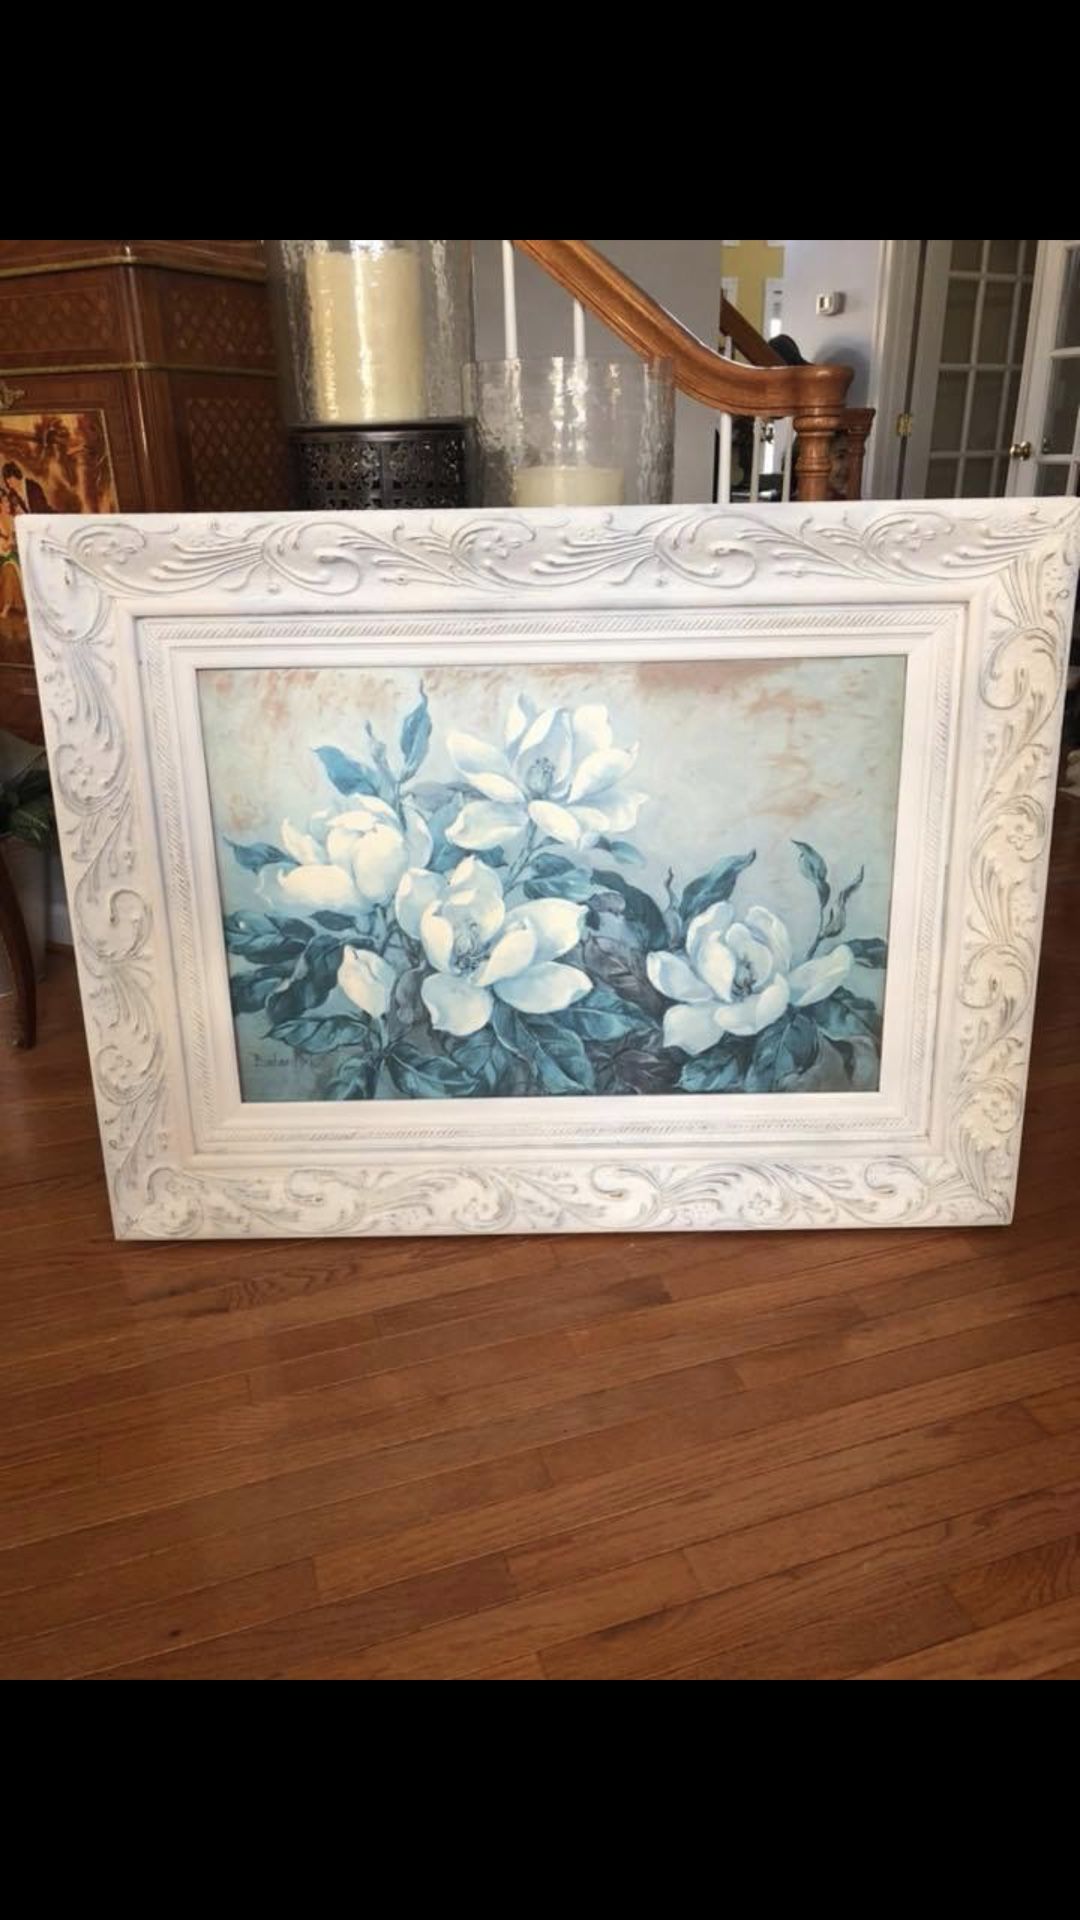 44”X32” A gorgeous Large signed flower painting in A Antique white distressed finish wooden frame